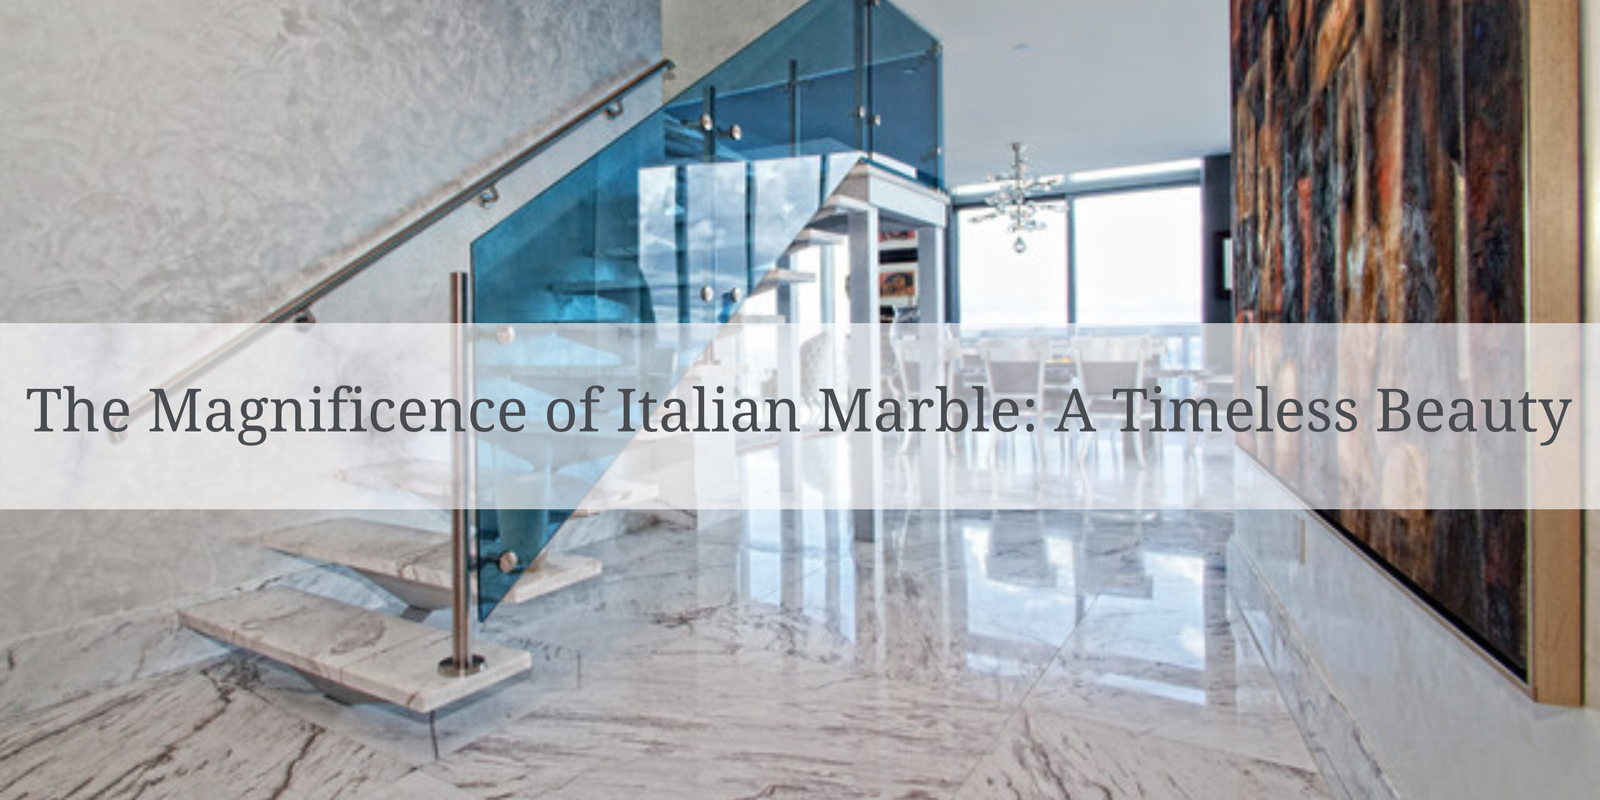 The Magnificence of Italian Marble: A Timeless Beauty